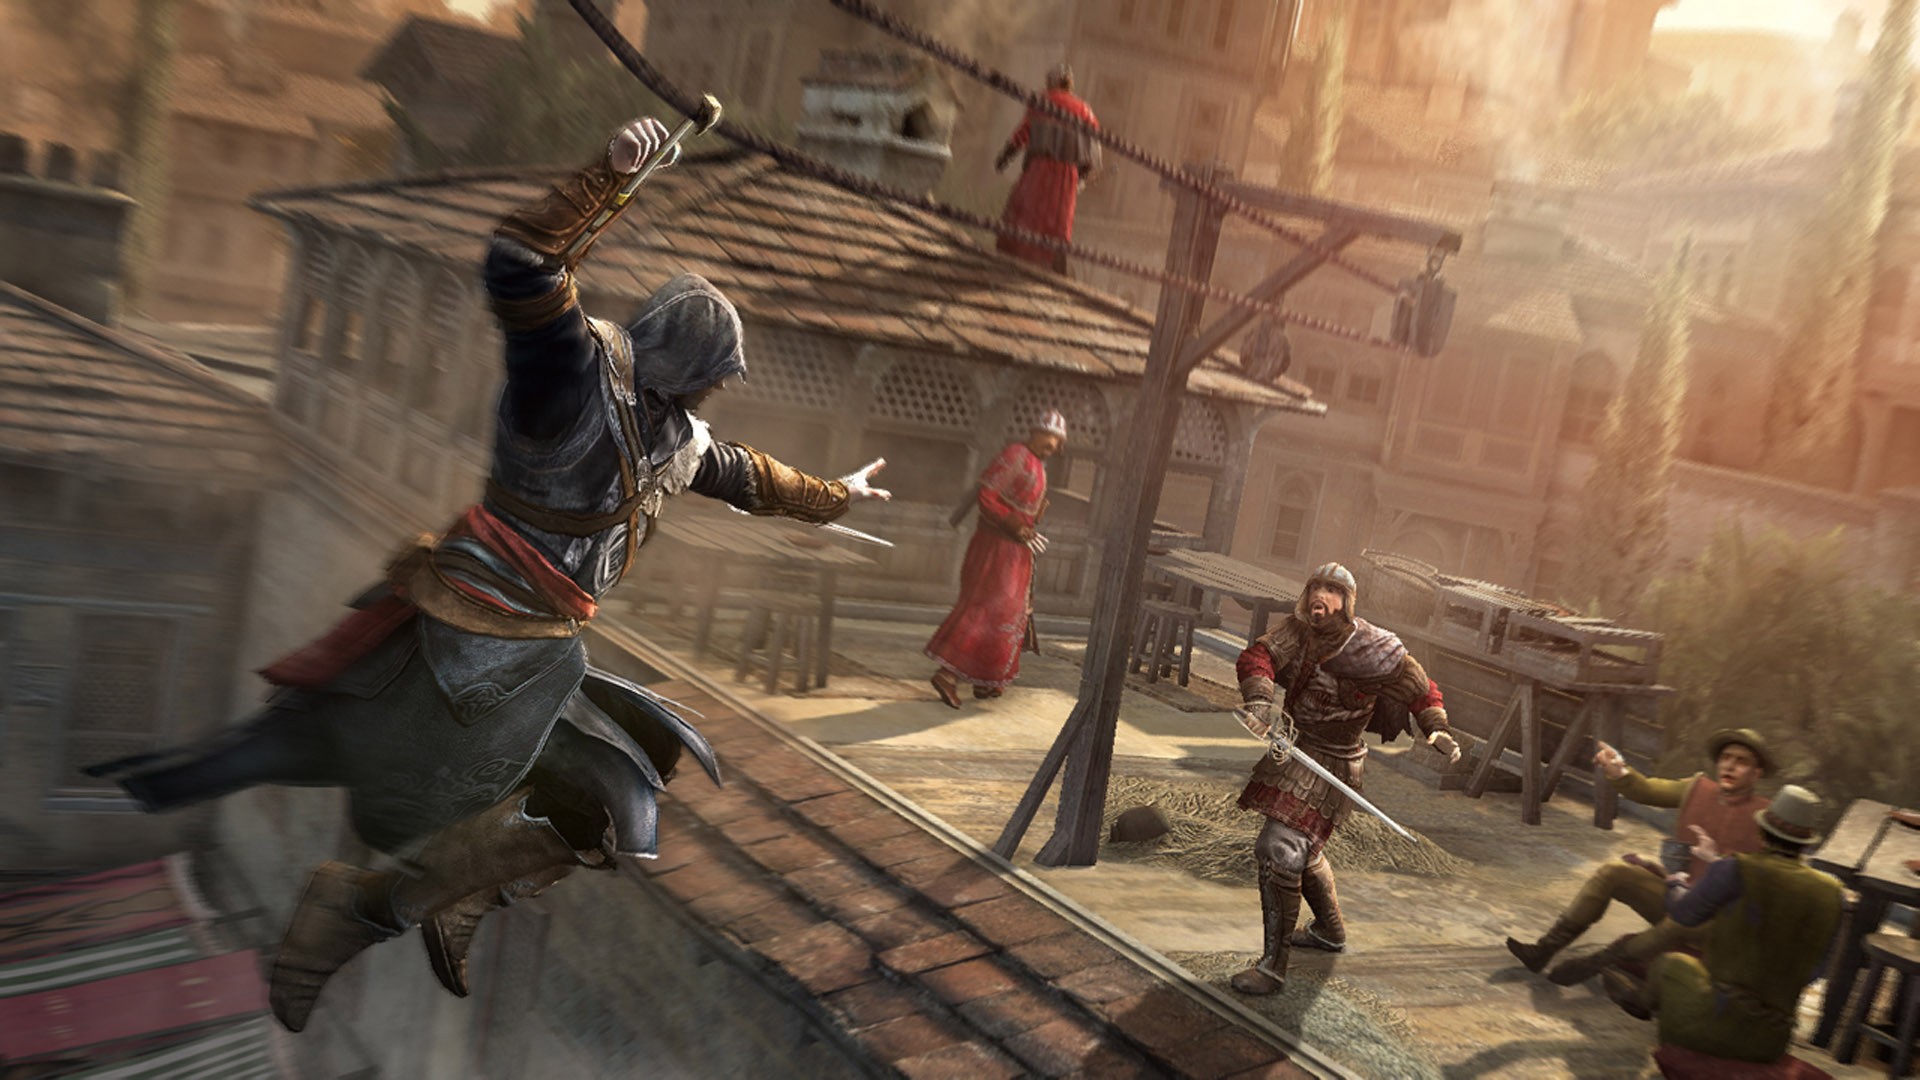 General 1920x1080 Assassin's Creed: Revelations video games Assassin's Creed video game art